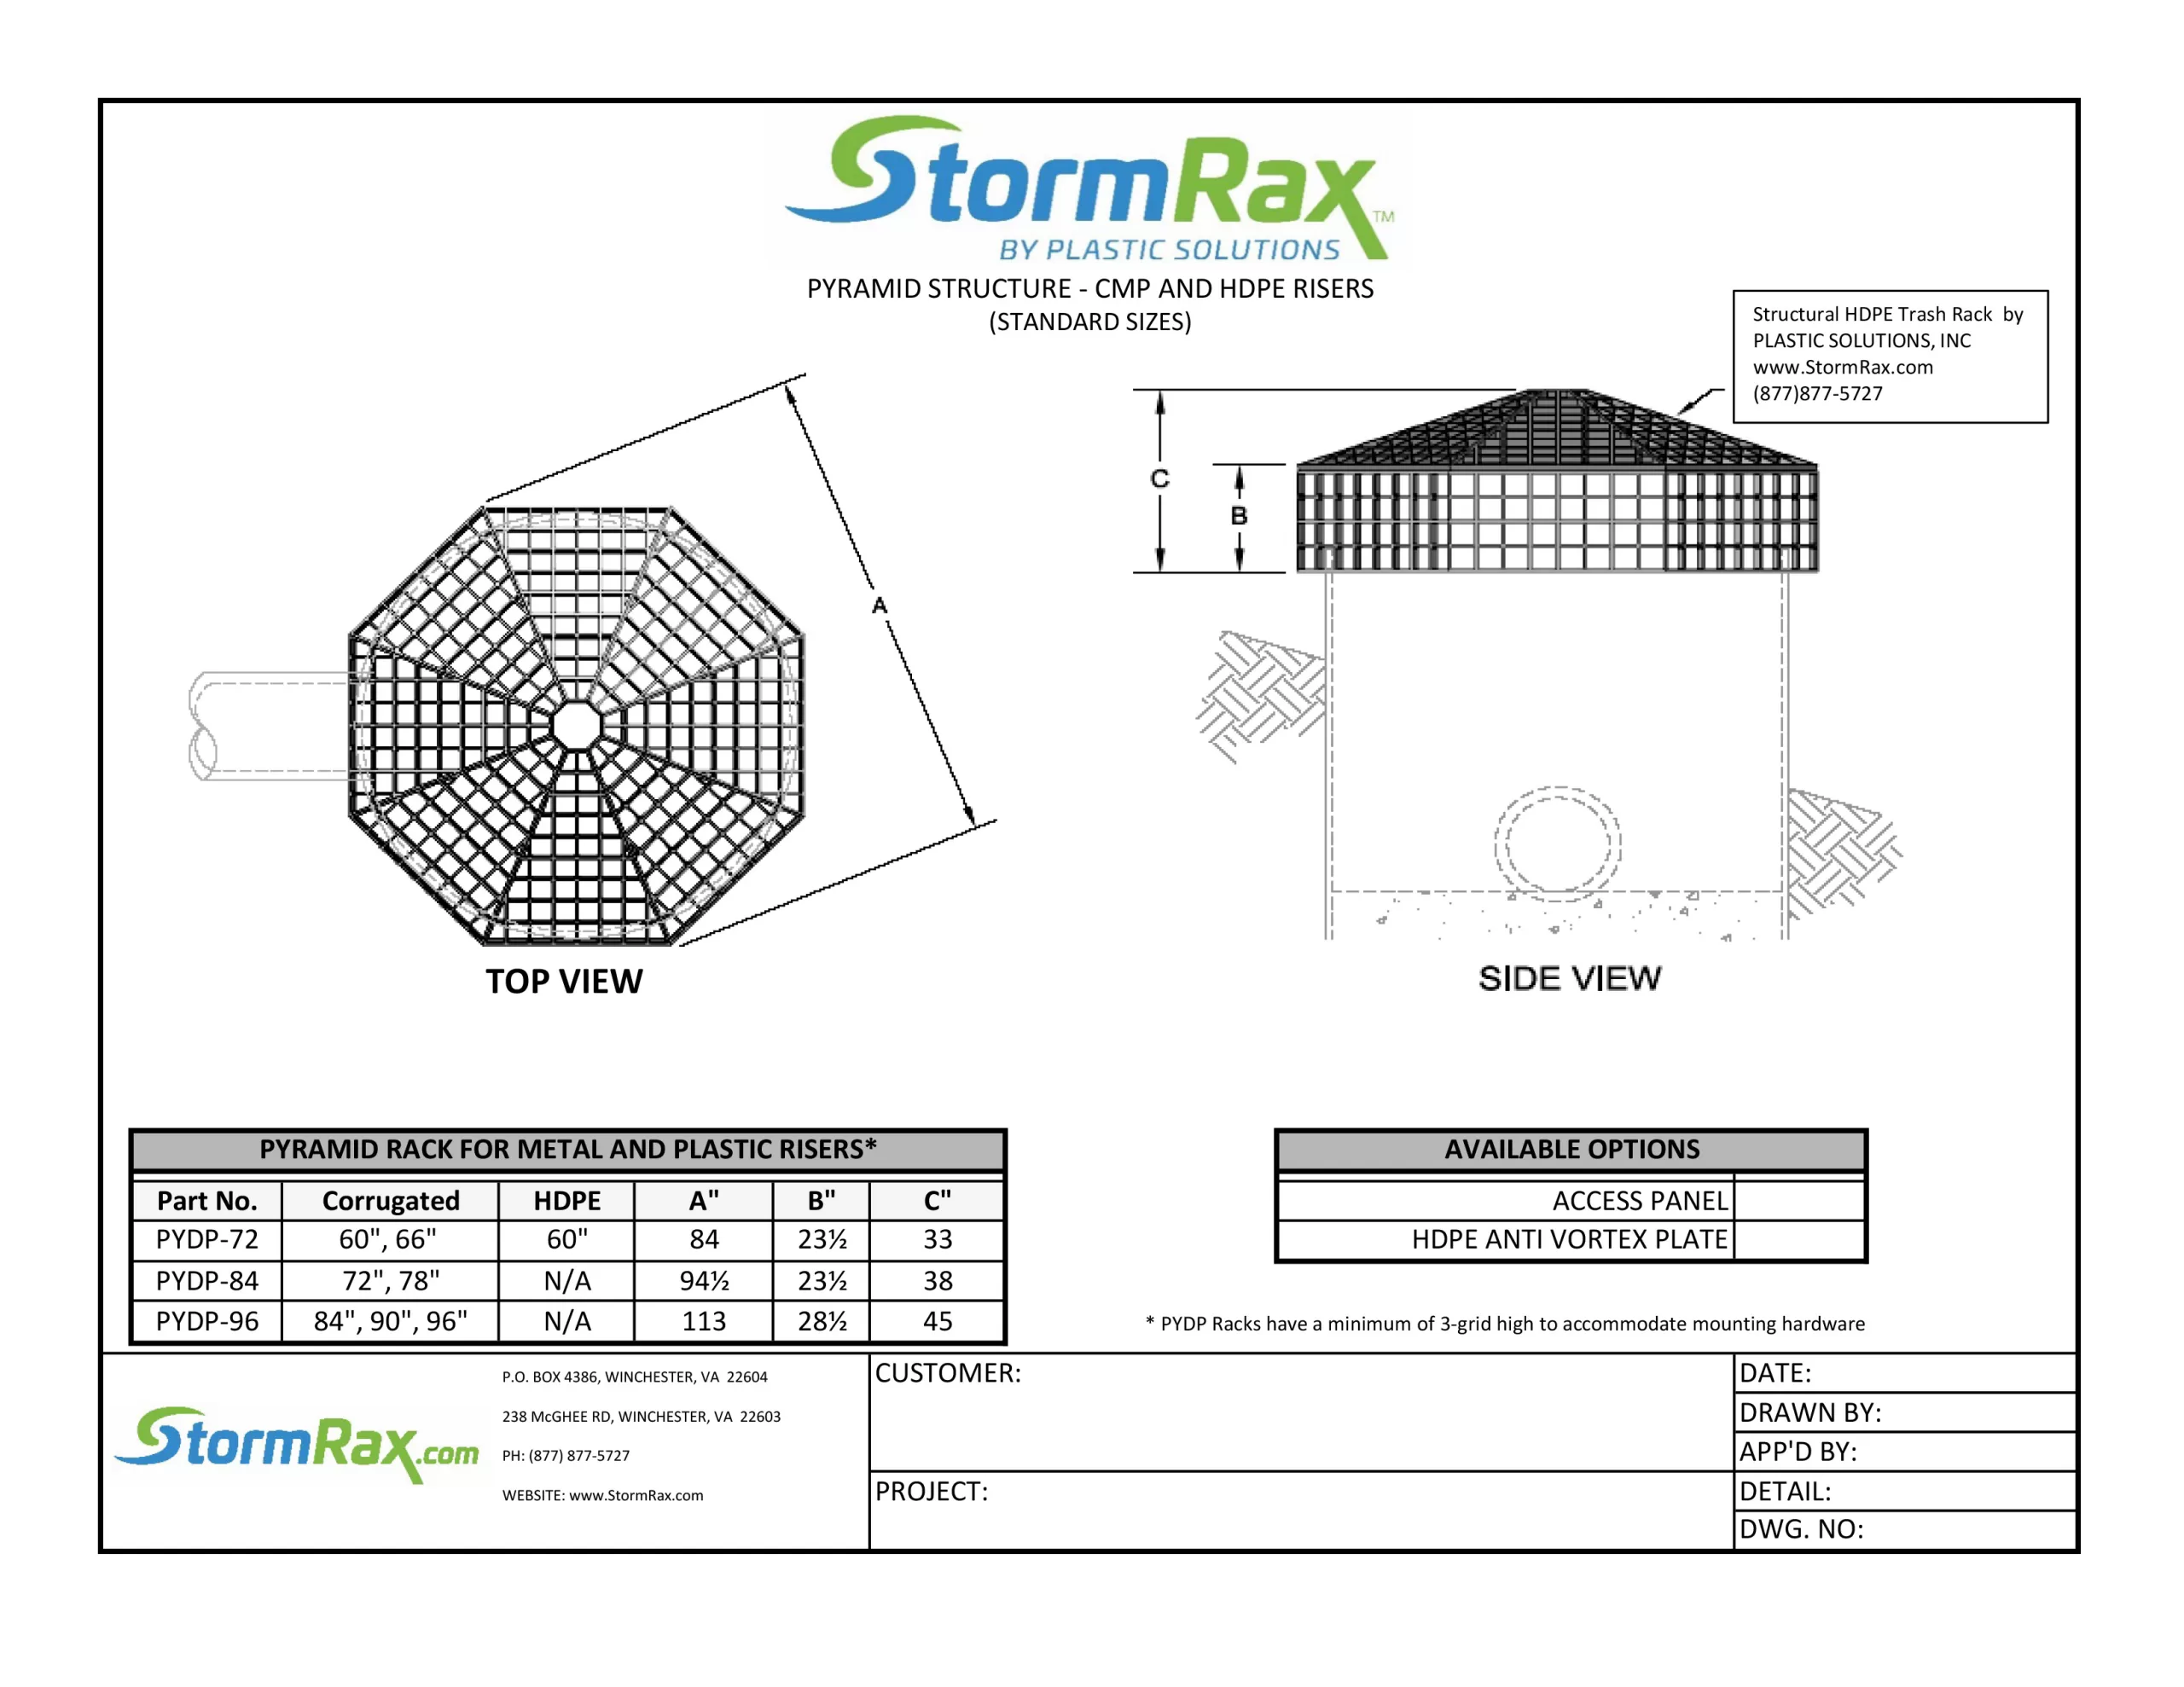 Technical drawing for stormrax pyramid rack for cmp-hdpe